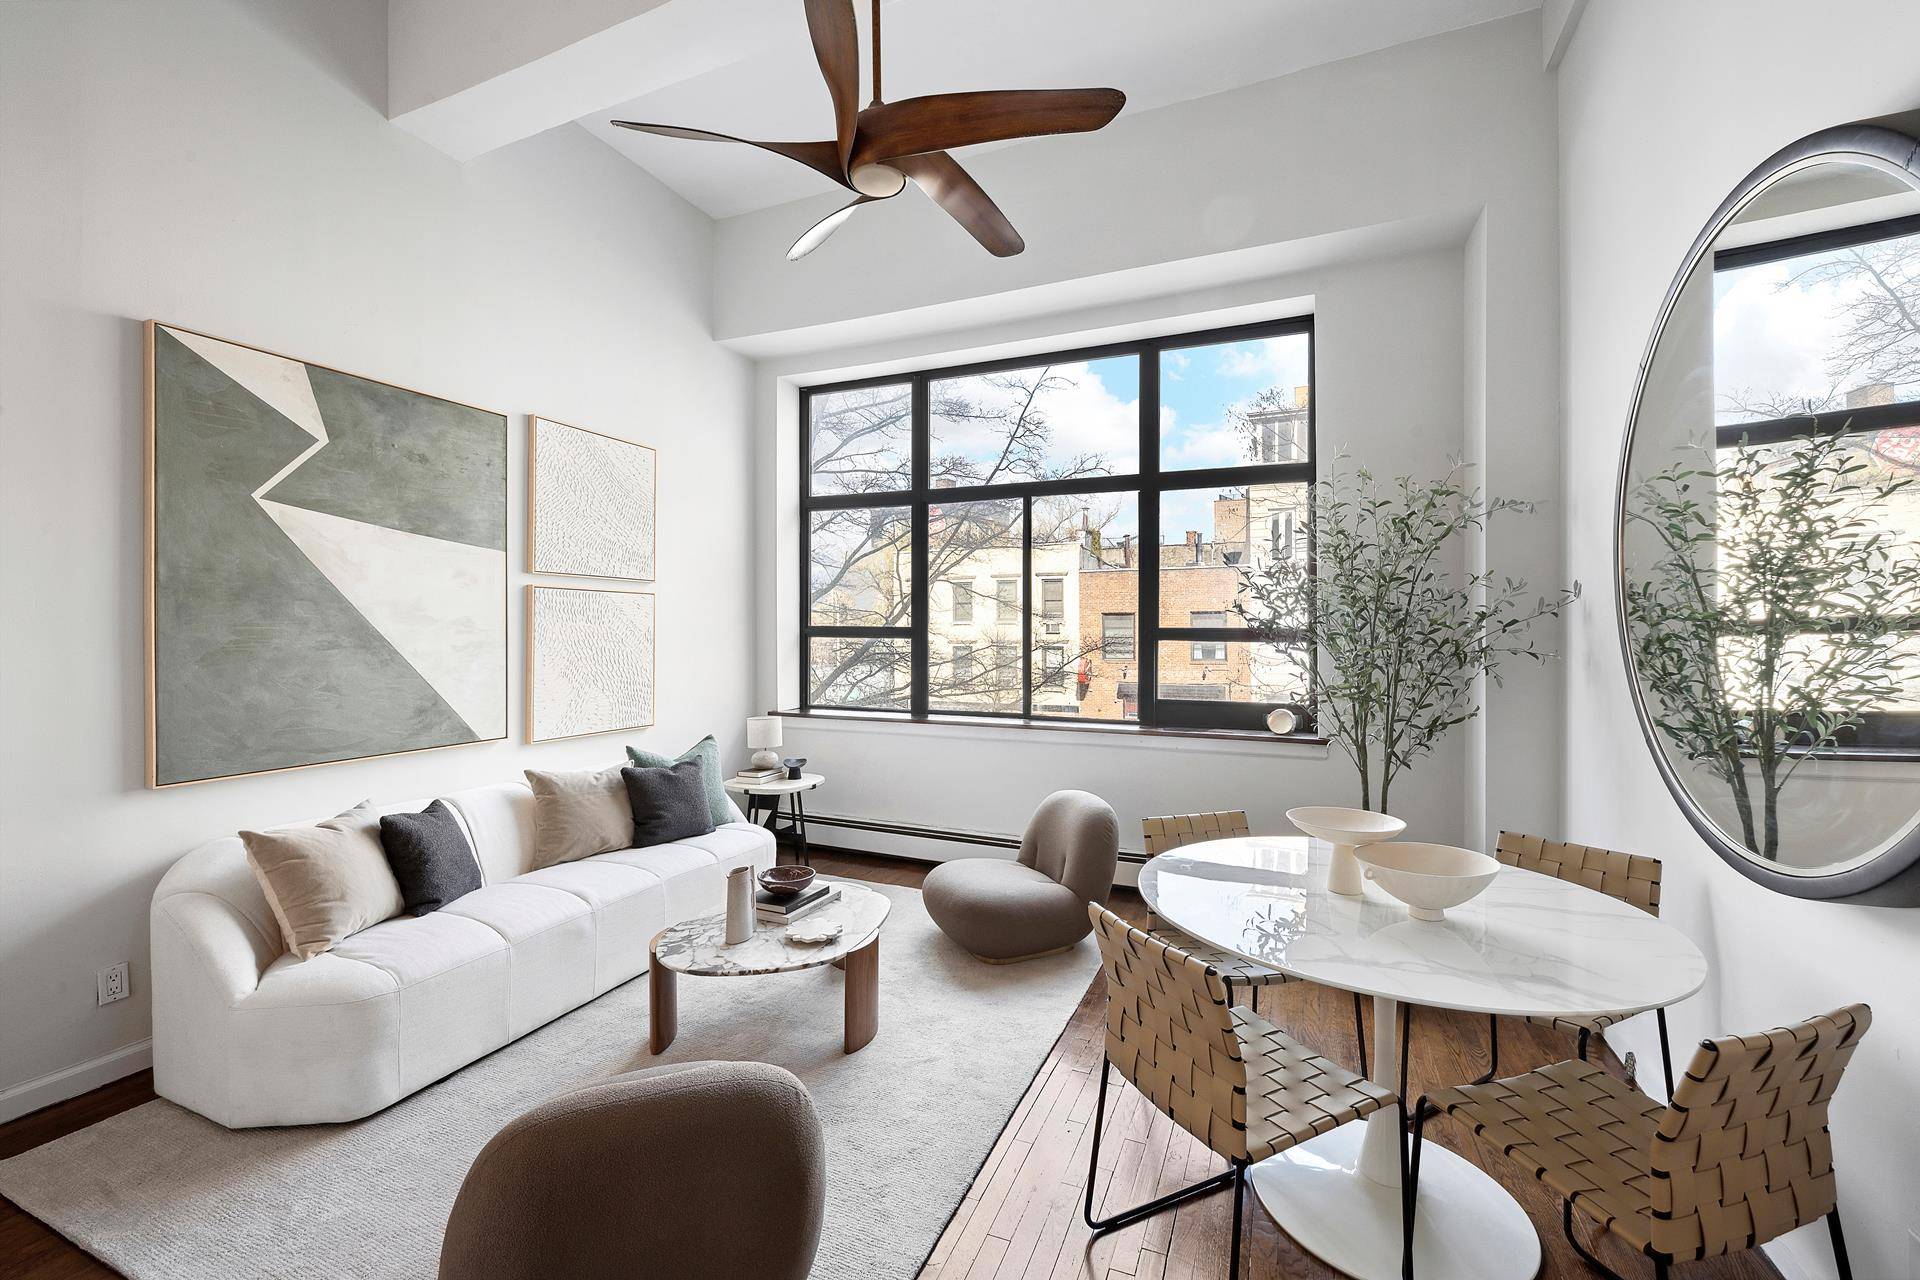 Perched atop the distinguished living spaces of New York City, discover a timeless 1931 industrial loft transformed into a coveted condominium in the highly desired West Village.